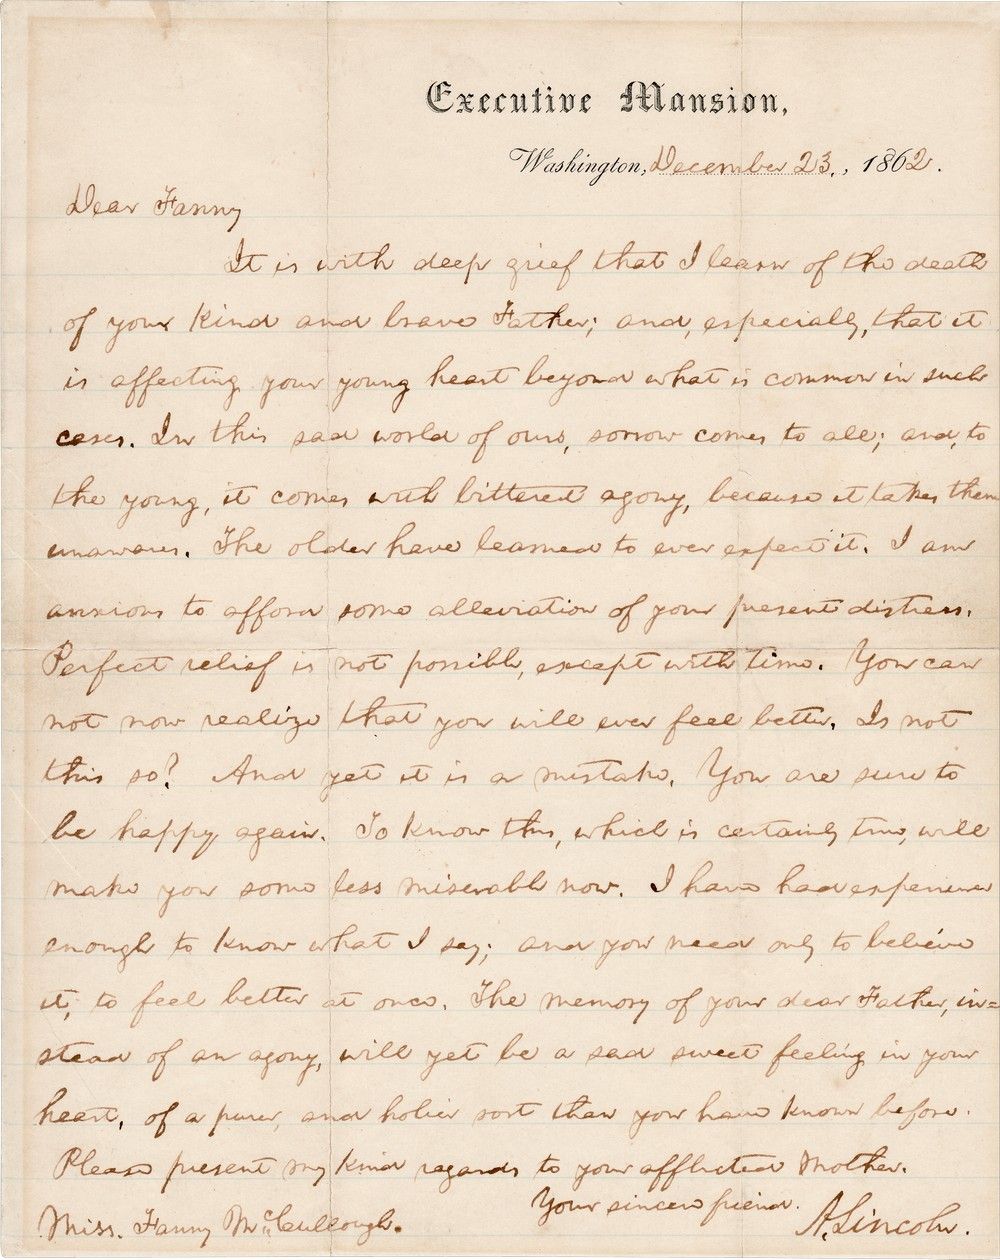 Abraham Lincoln's Famous Civil War Condolence Letter to Young Fanny McCullough About Loss and Memory